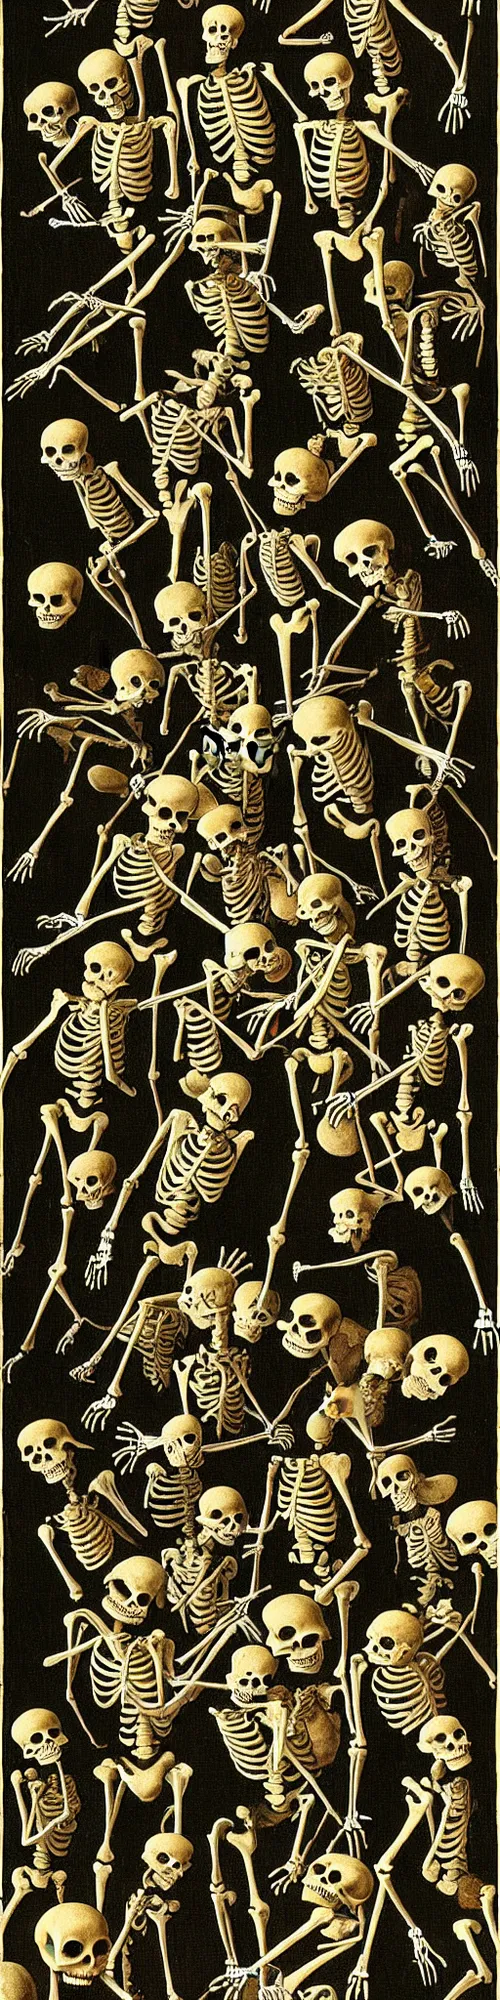 Prompt: skeletons dancing, hieronymus bosch, victor moscoso